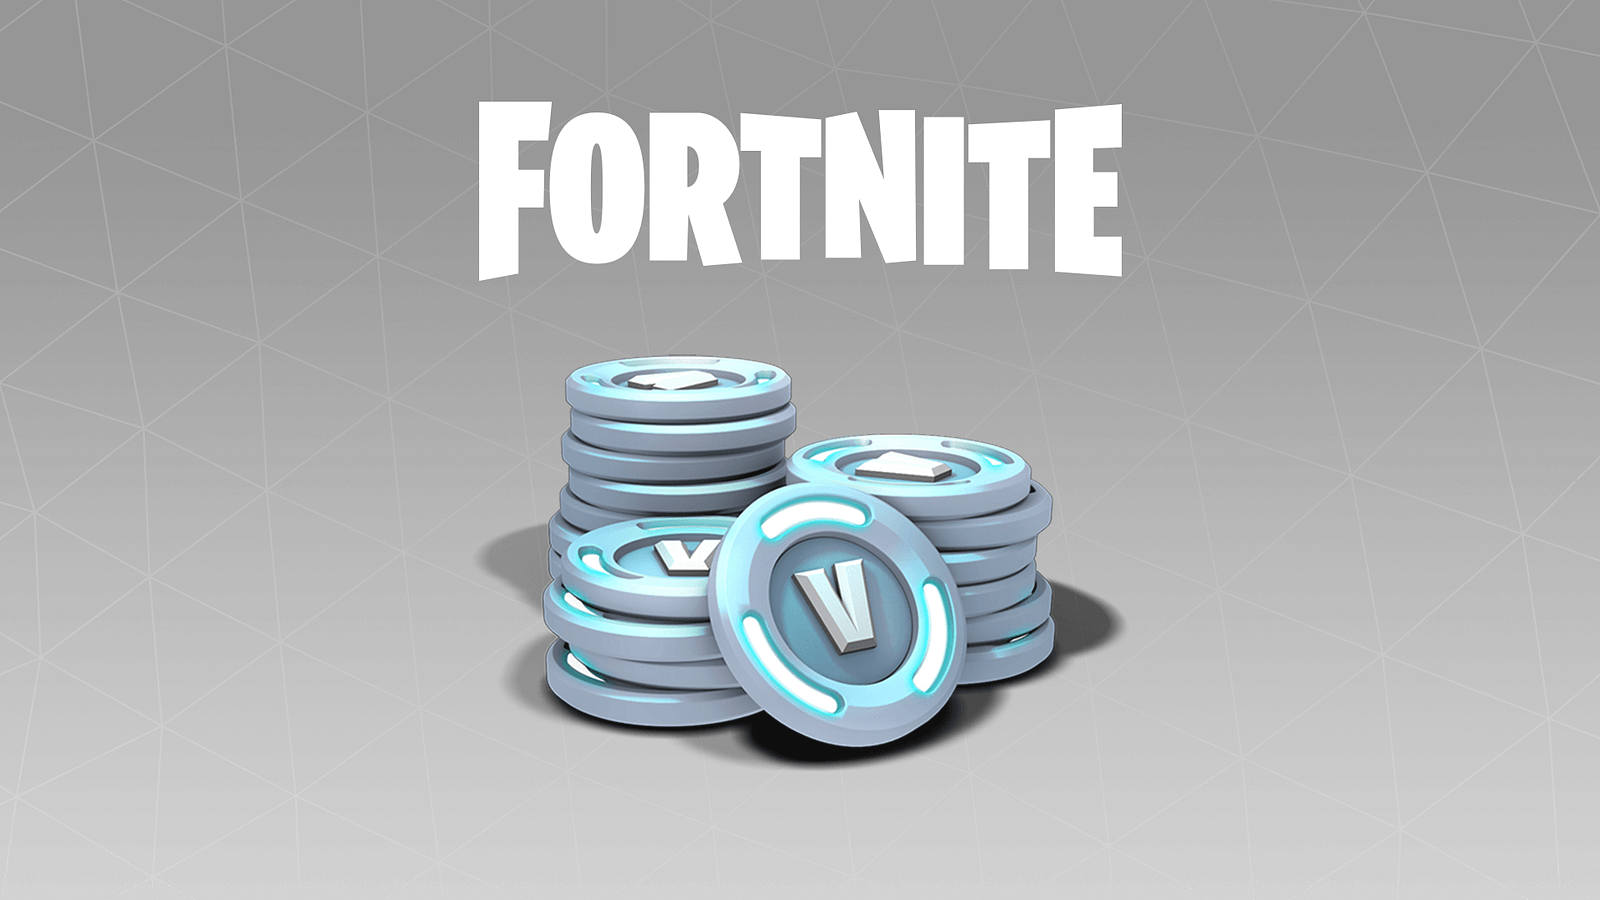 in-game currencies as tokens: Fortnite’s V-Bucks